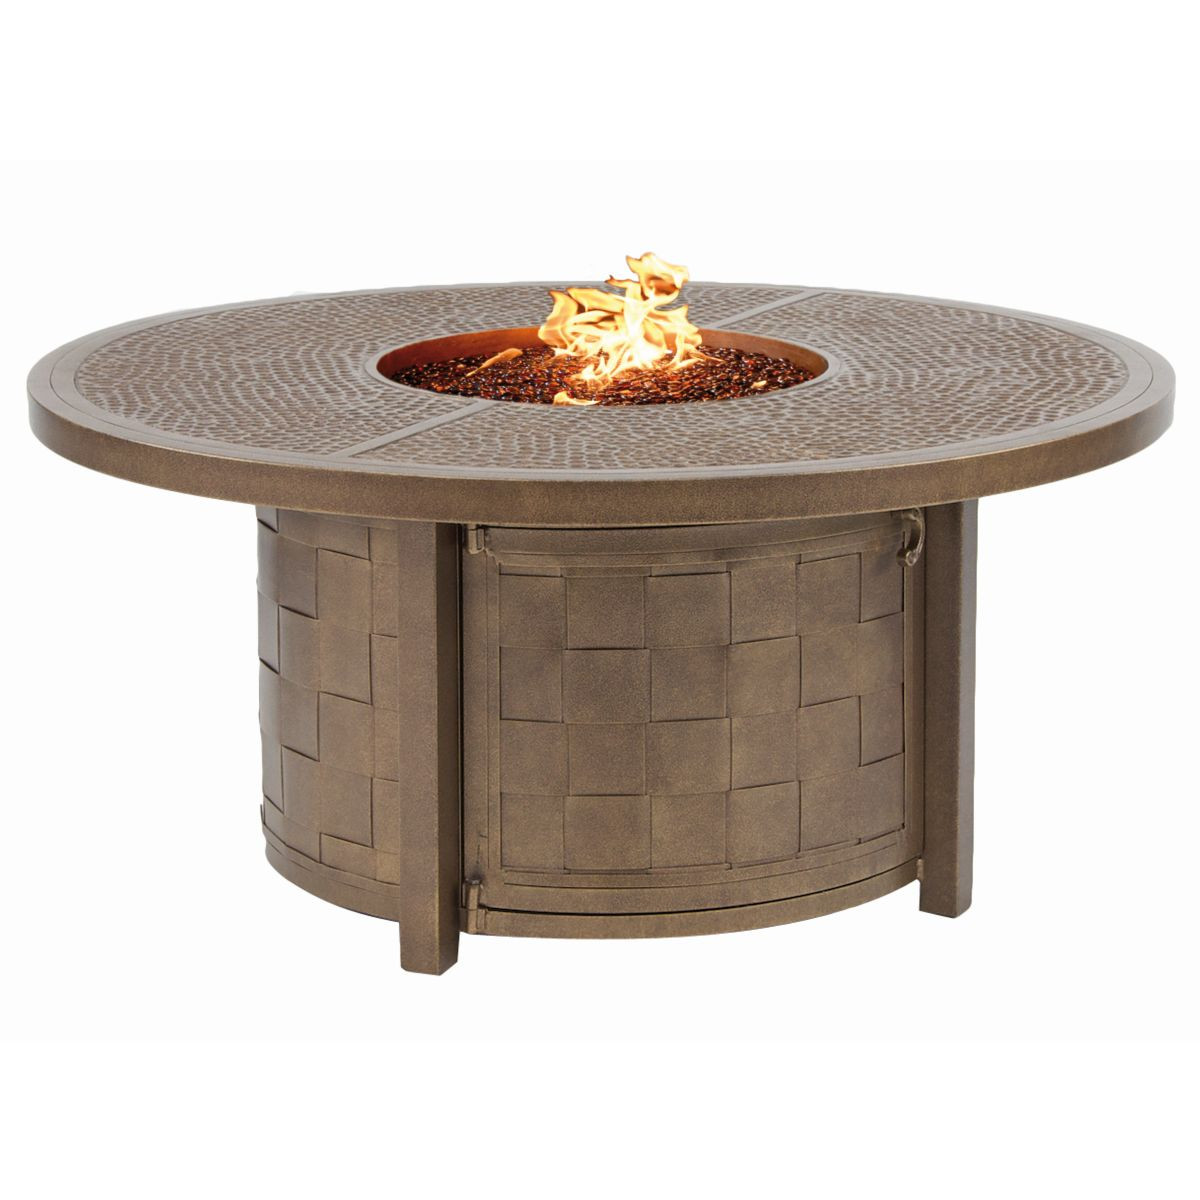 Coffee Table Fire Pit
 Castelle Resort Fire Pit 49 Round Coffee Table